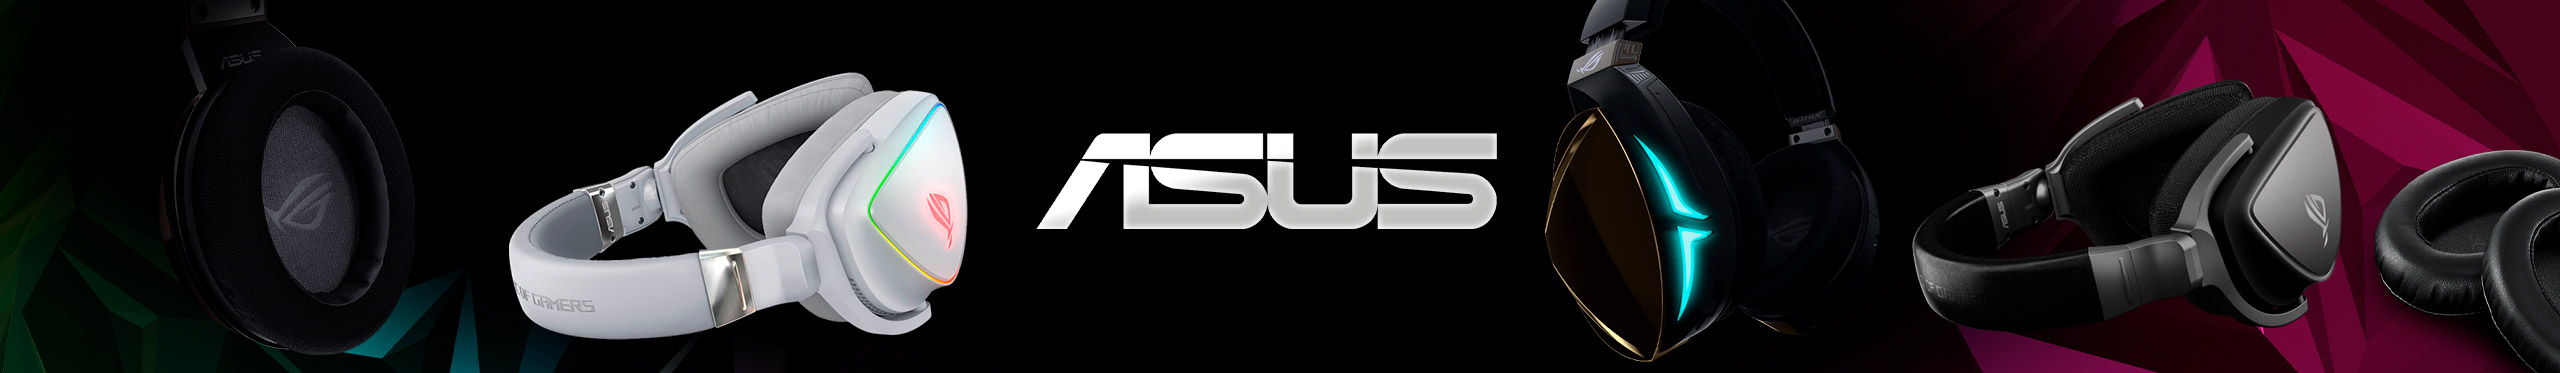 Headsets ASUS